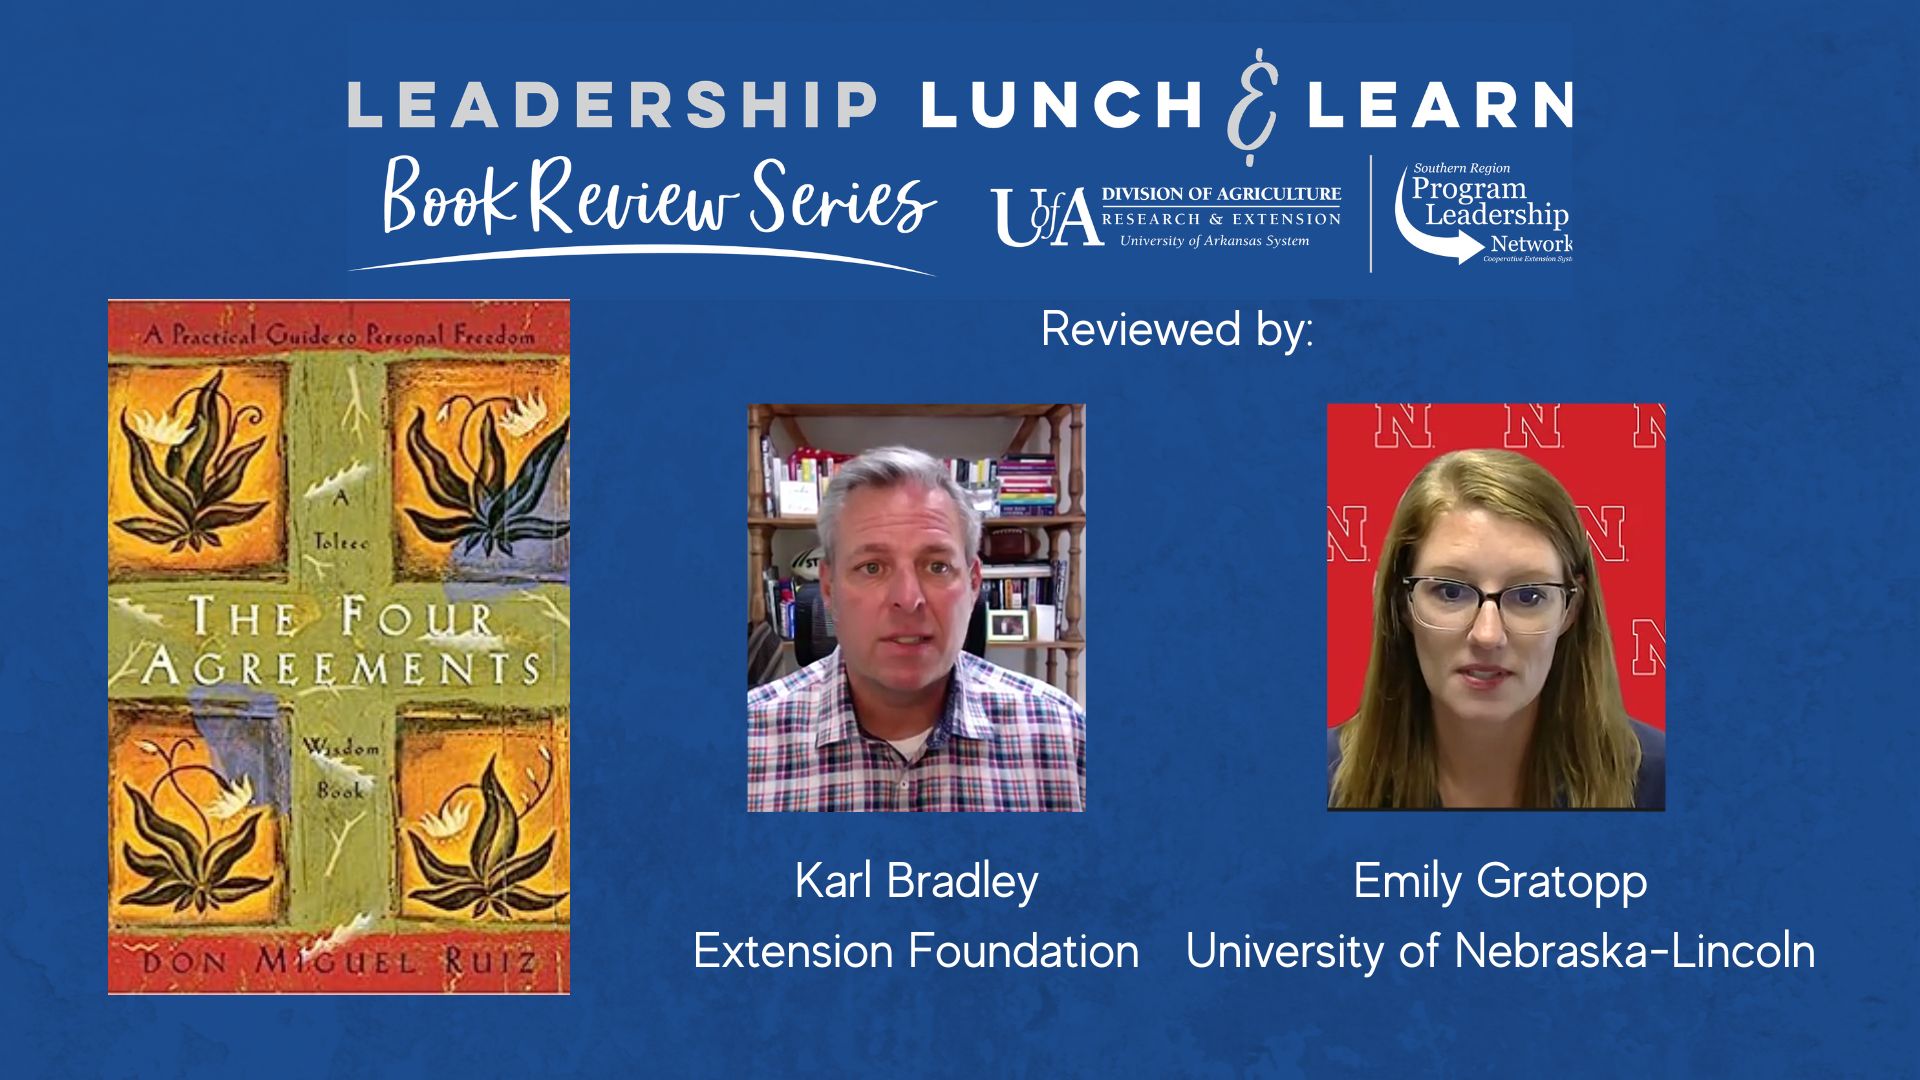 Pictures of book cover and presenters-Karl Bradley and emily Gratopp